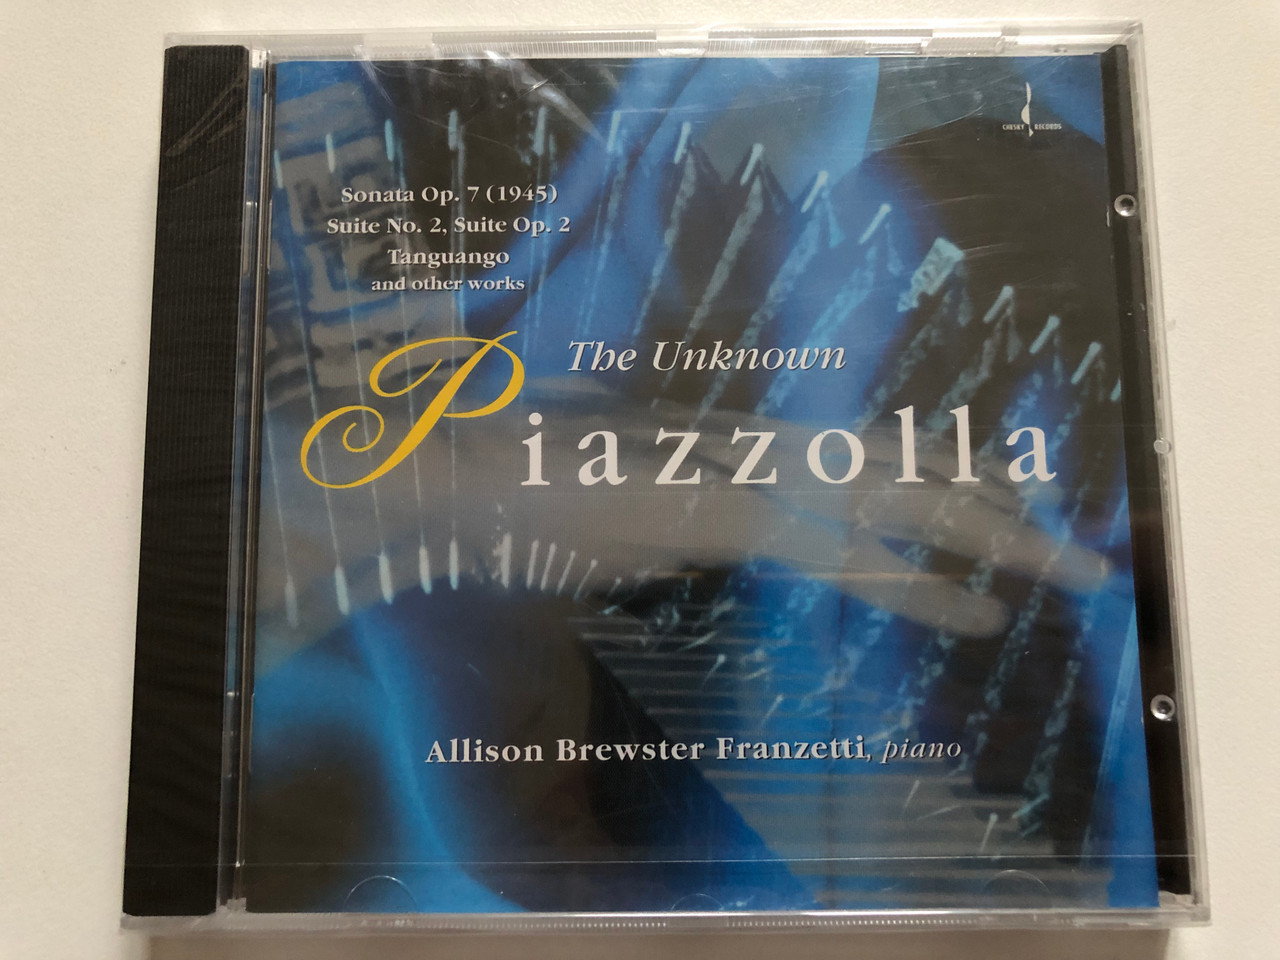 https://cdn10.bigcommerce.com/s-62bdpkt7pb/products/0/images/312035/Allison_Brewster_Franzetti_piano_The_Unknown_Piazzolla_Sonata_Op._7_1945_Suite_No._2_Suite_Op._2_Tanguango_and_others_works_Chesky_Records_Audio_CD_1999_CD_190__50342.1699871482.1280.1280.JPG?c=2